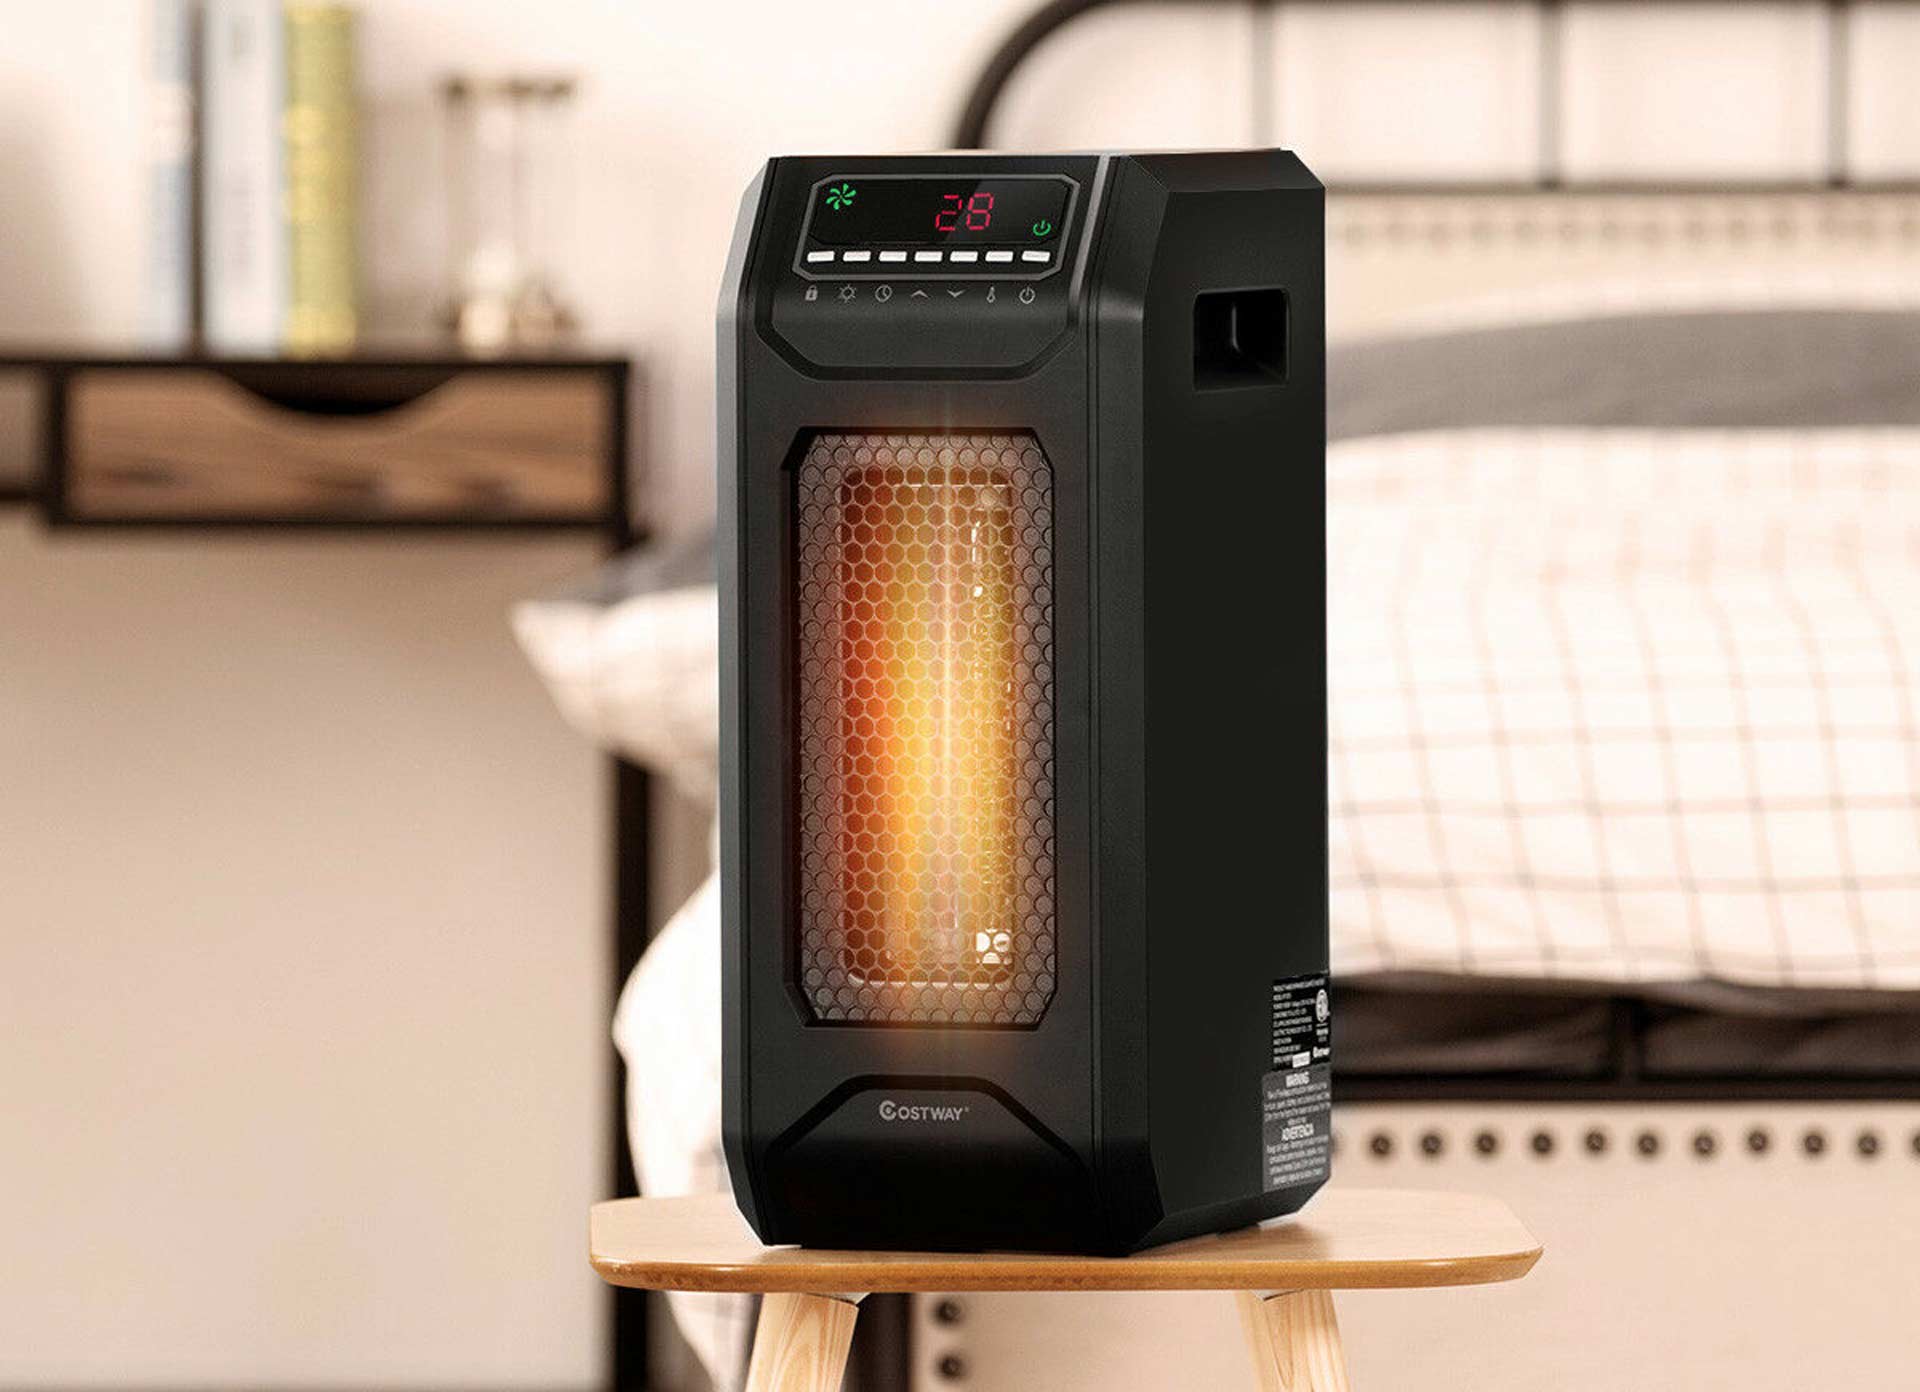  Dreo 24 Fast Quiet Oscillating Ceramic Space Heater with  Remote - 3 Modes, Overheating & Tip-Over Protection : Home & Kitchen